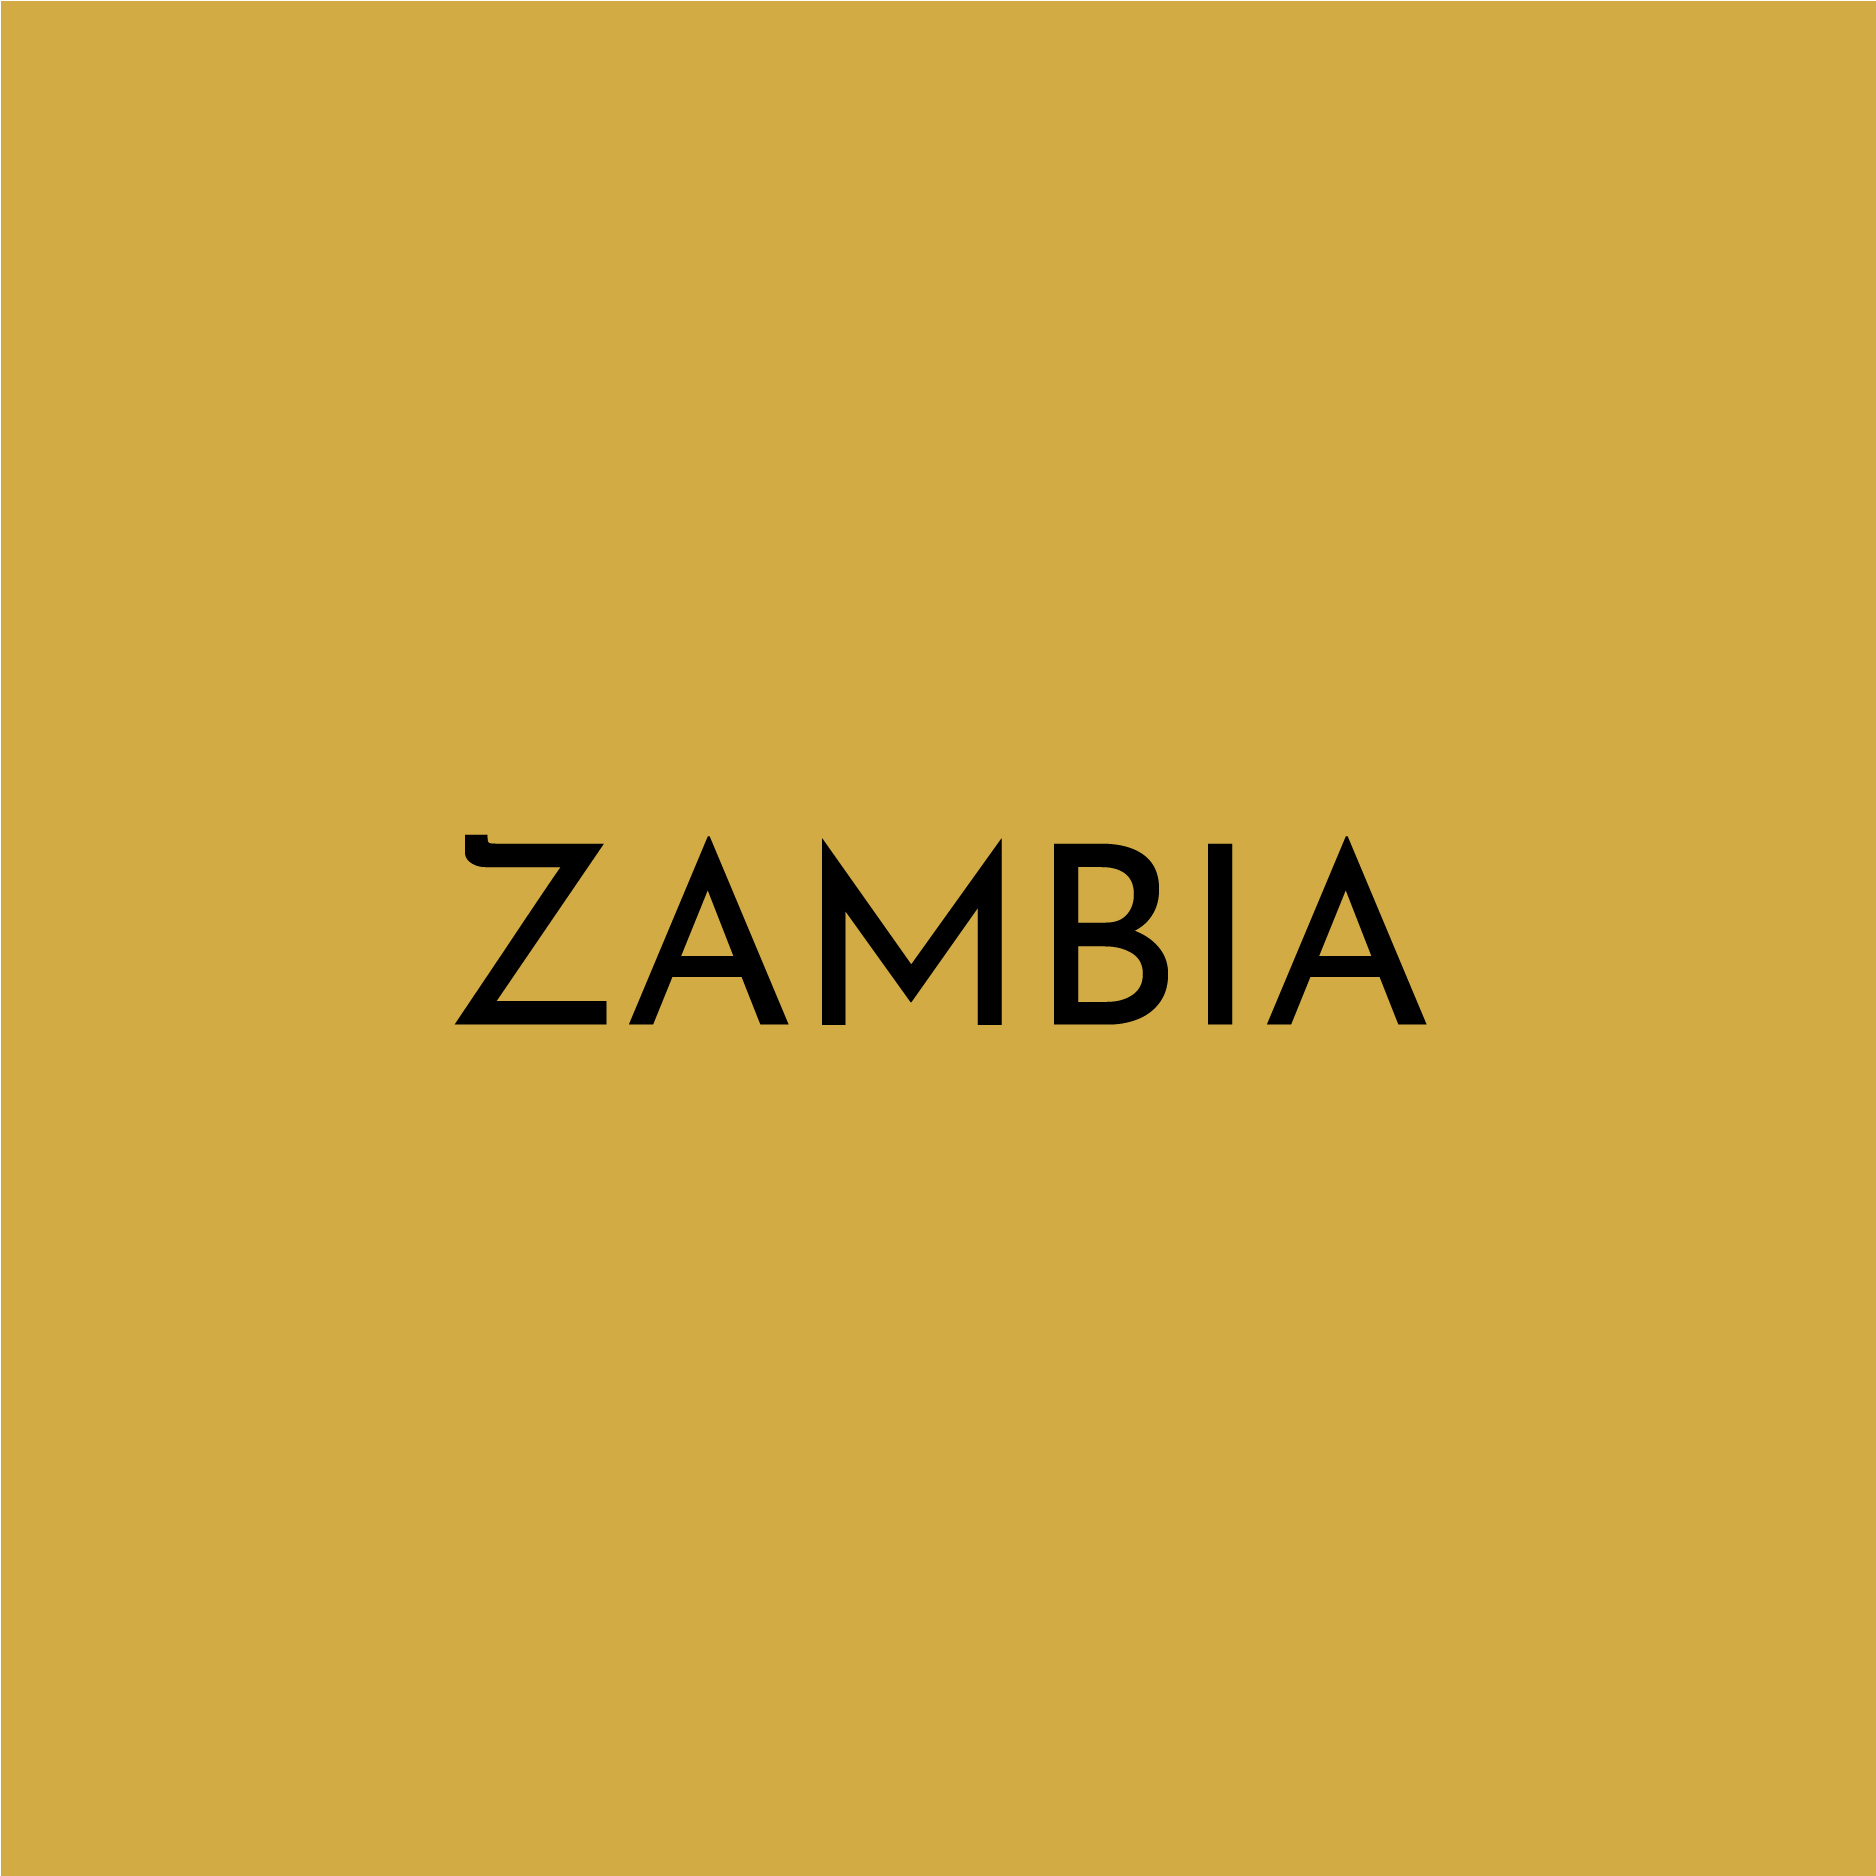 A solid yellow block contains the text “ZAMBIA”